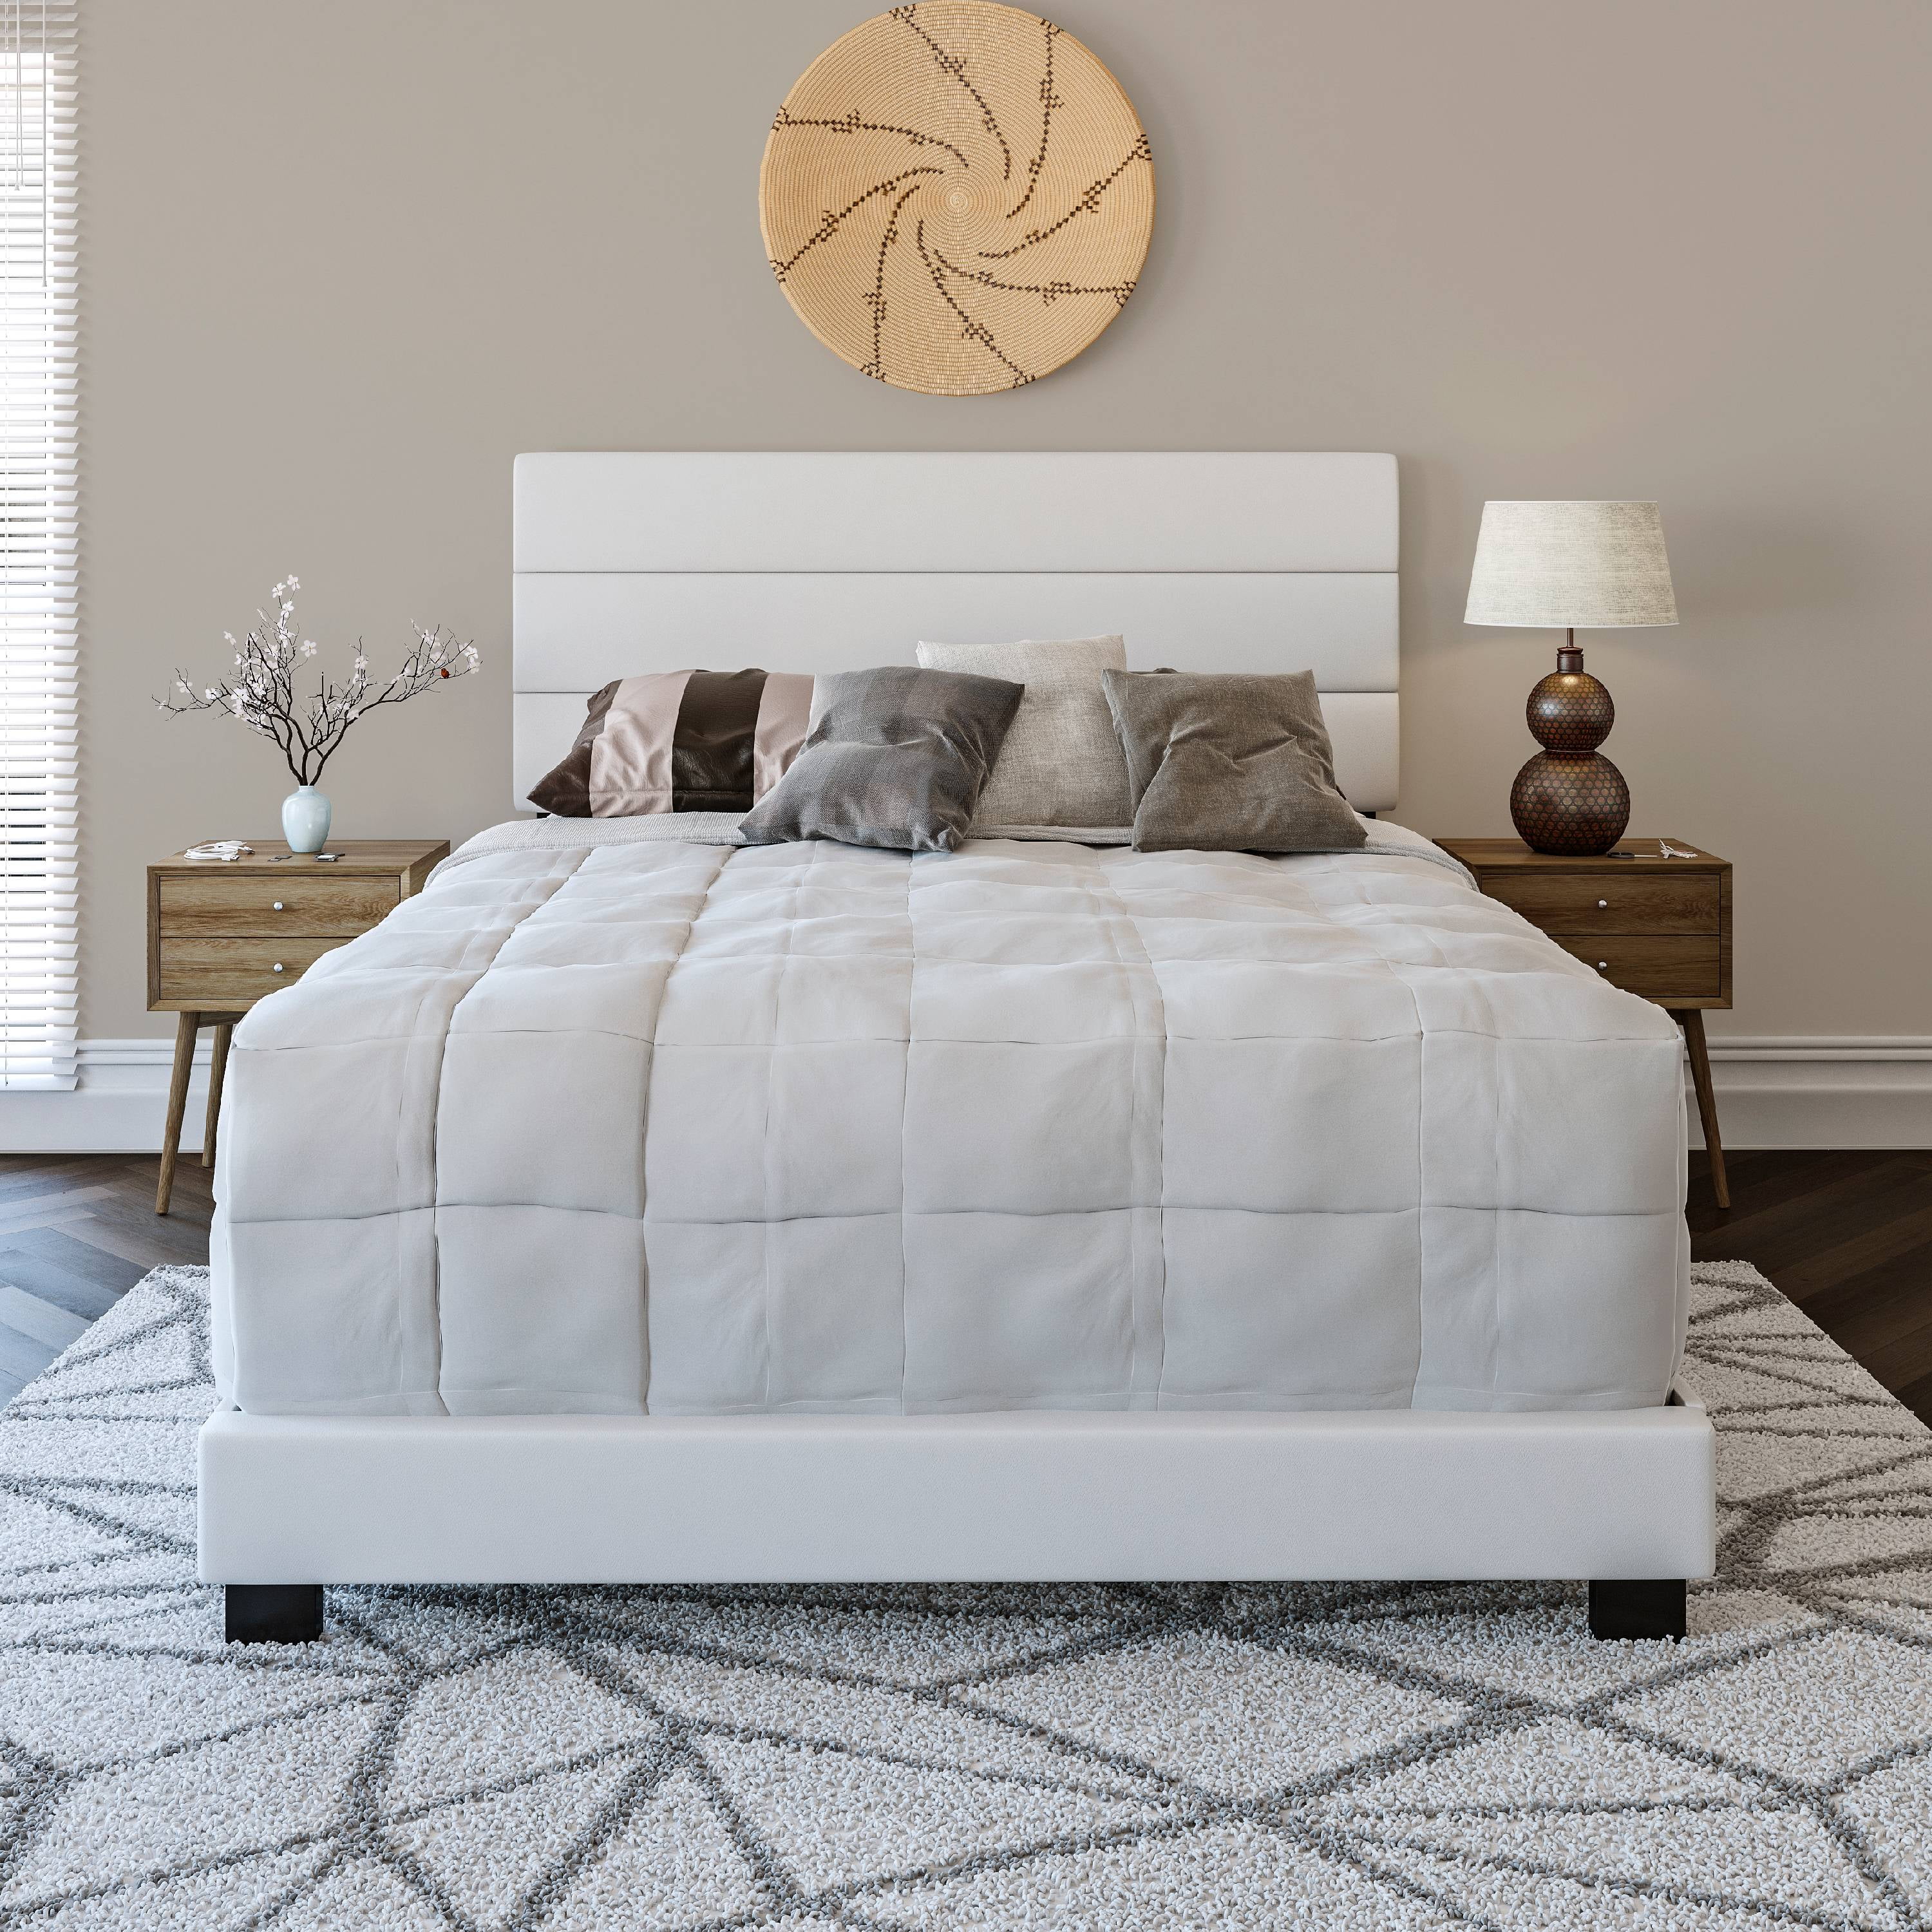 Premier Rapallo Upholstered Faux, White Leather King Headboard